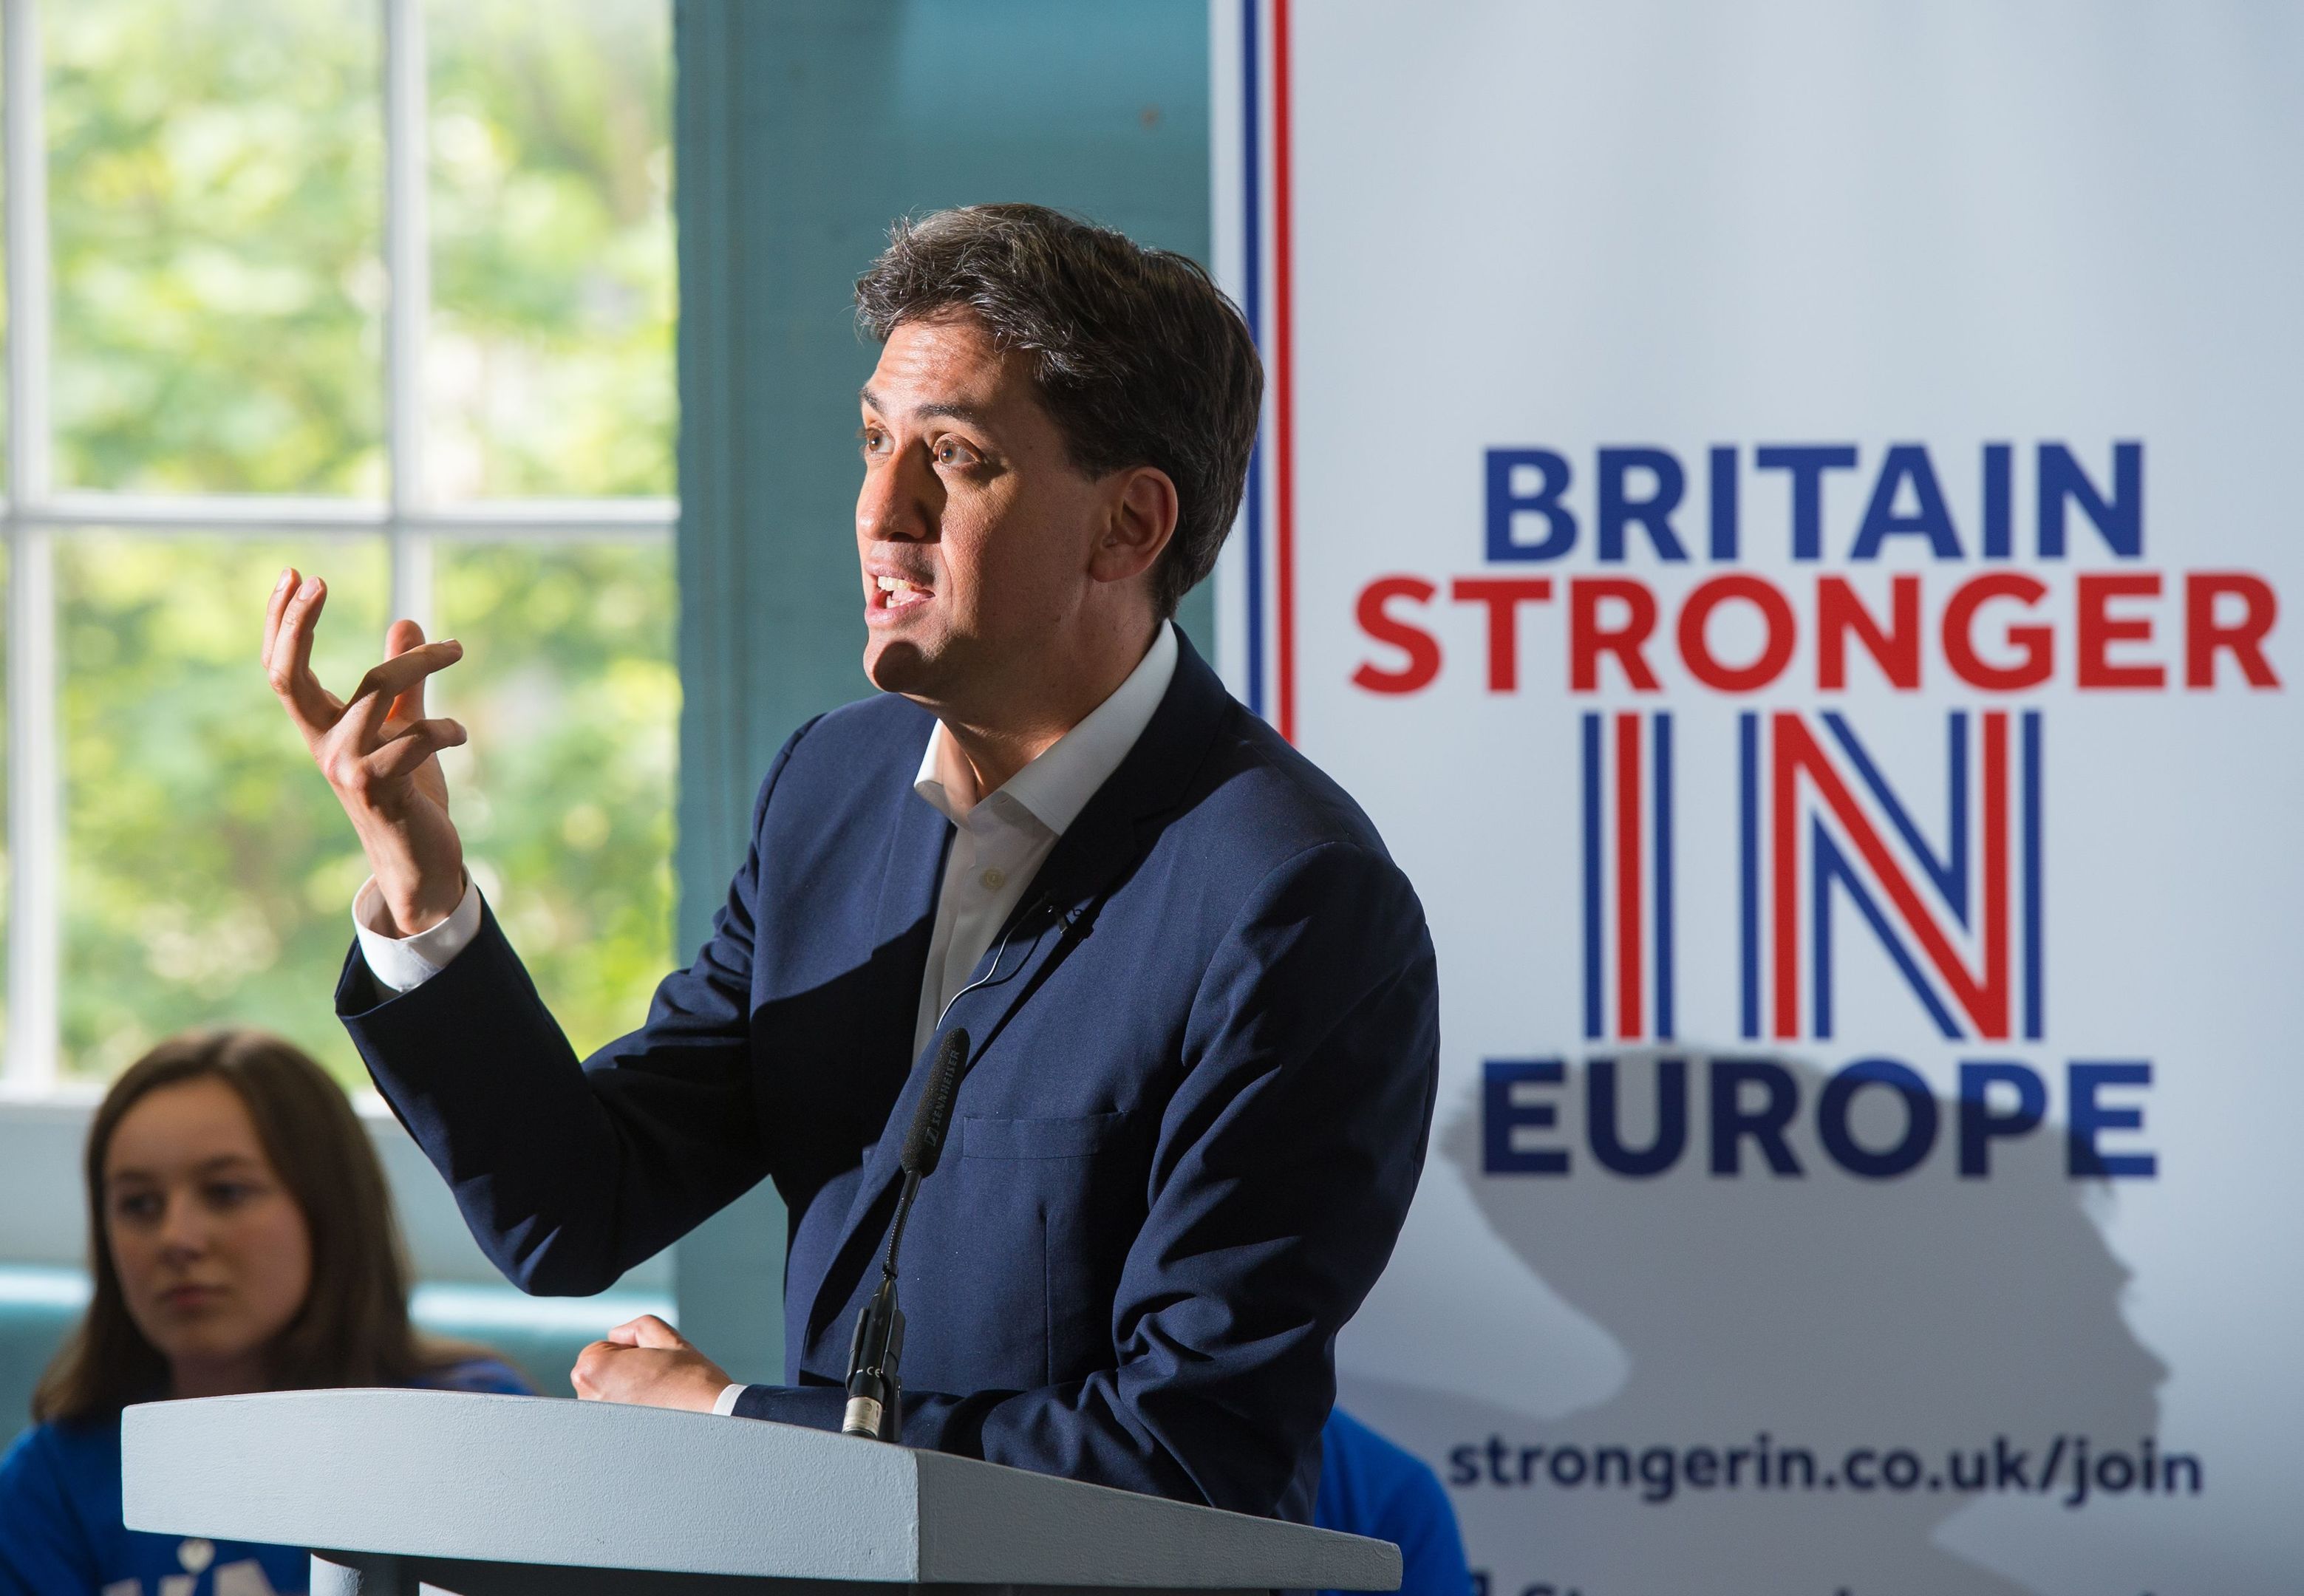 Former Labour Leader Ed Miliband hosts a question and answer session with young people to discuss the European Union referendum (Dominic Lipinski/ PA)